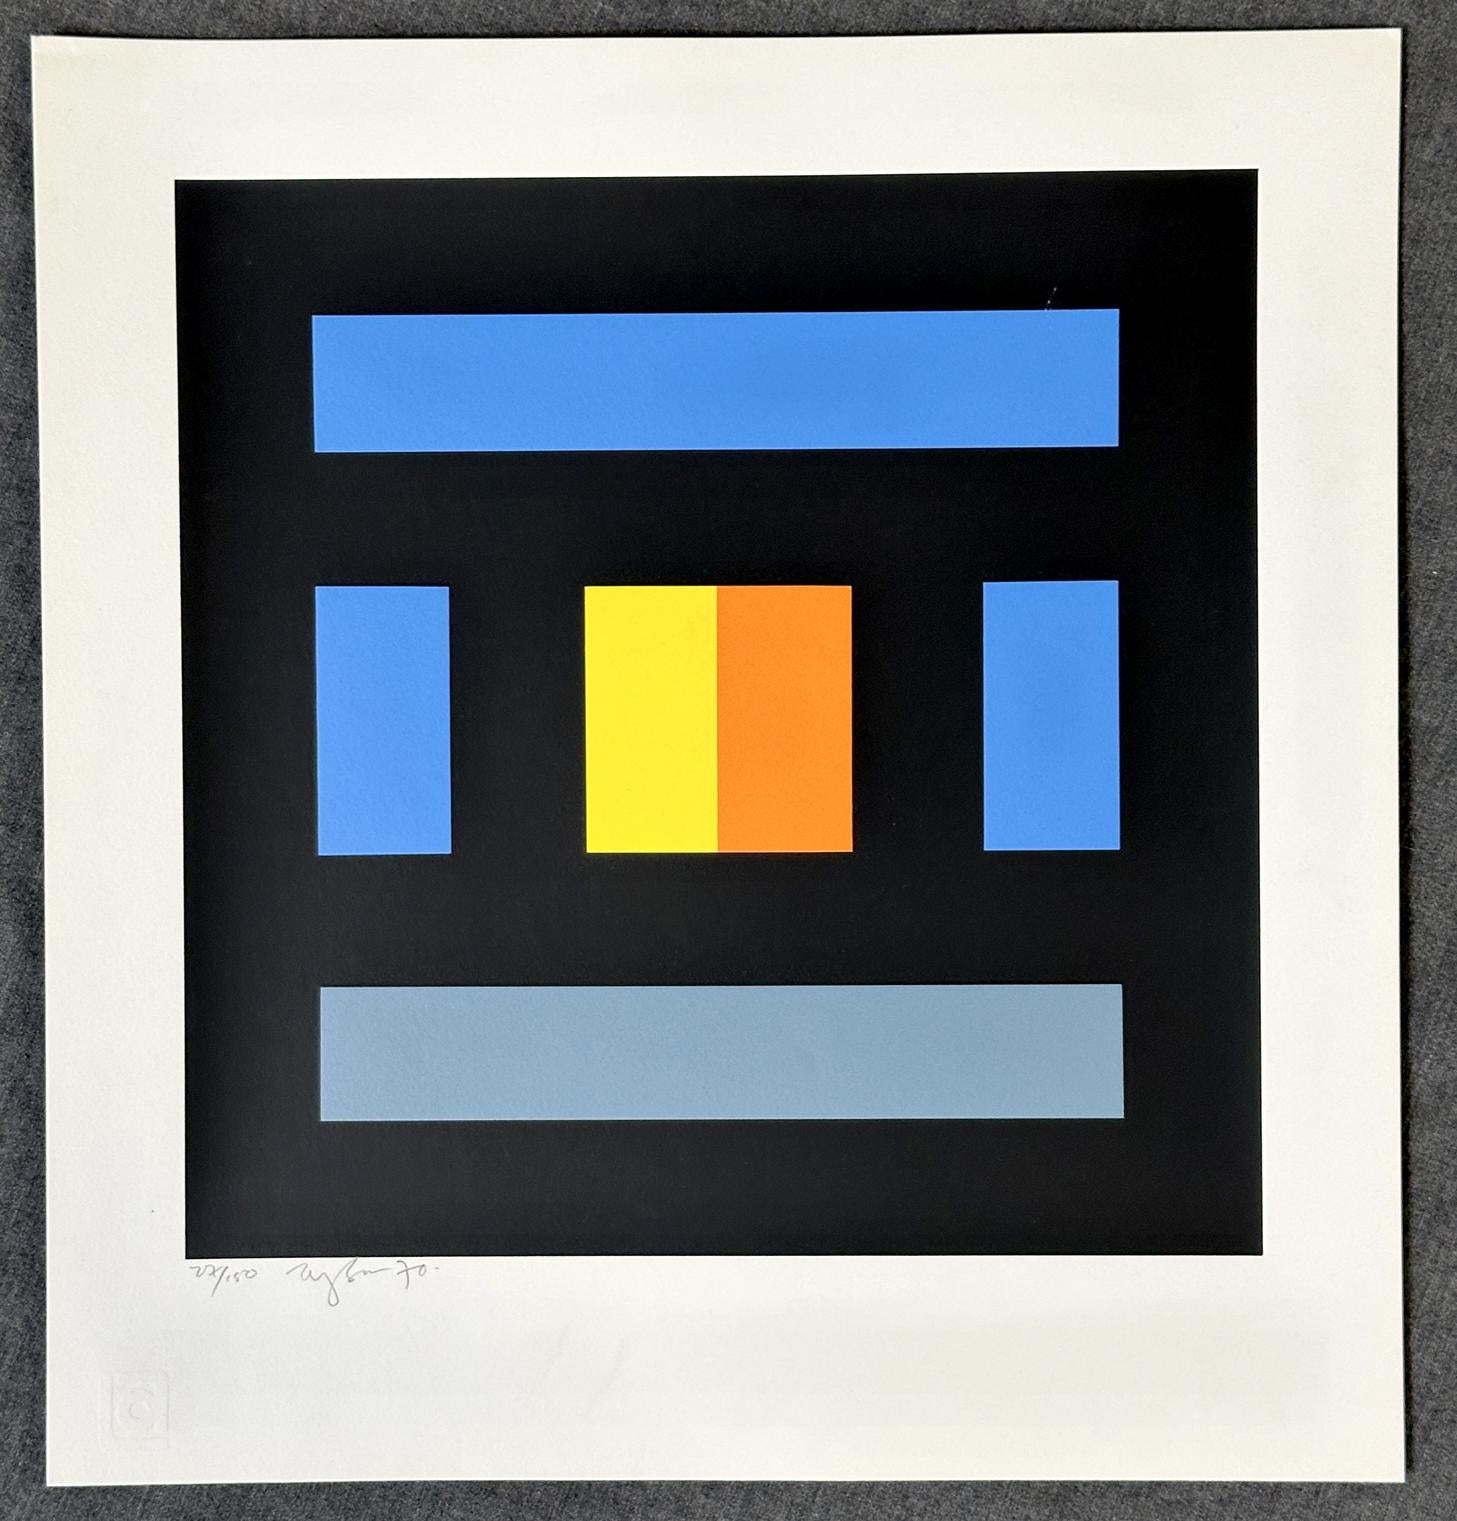 Ian Tyson
Diversions  - 1970
Screen Print
16'' x 15'' inches
Edition: signed in pencil and marked 27/150

Ian Tyson, British painter, printmaker and book artist, was born in Wallasey, Cheshire, England, in 1933, and studied at the Birkenhead School